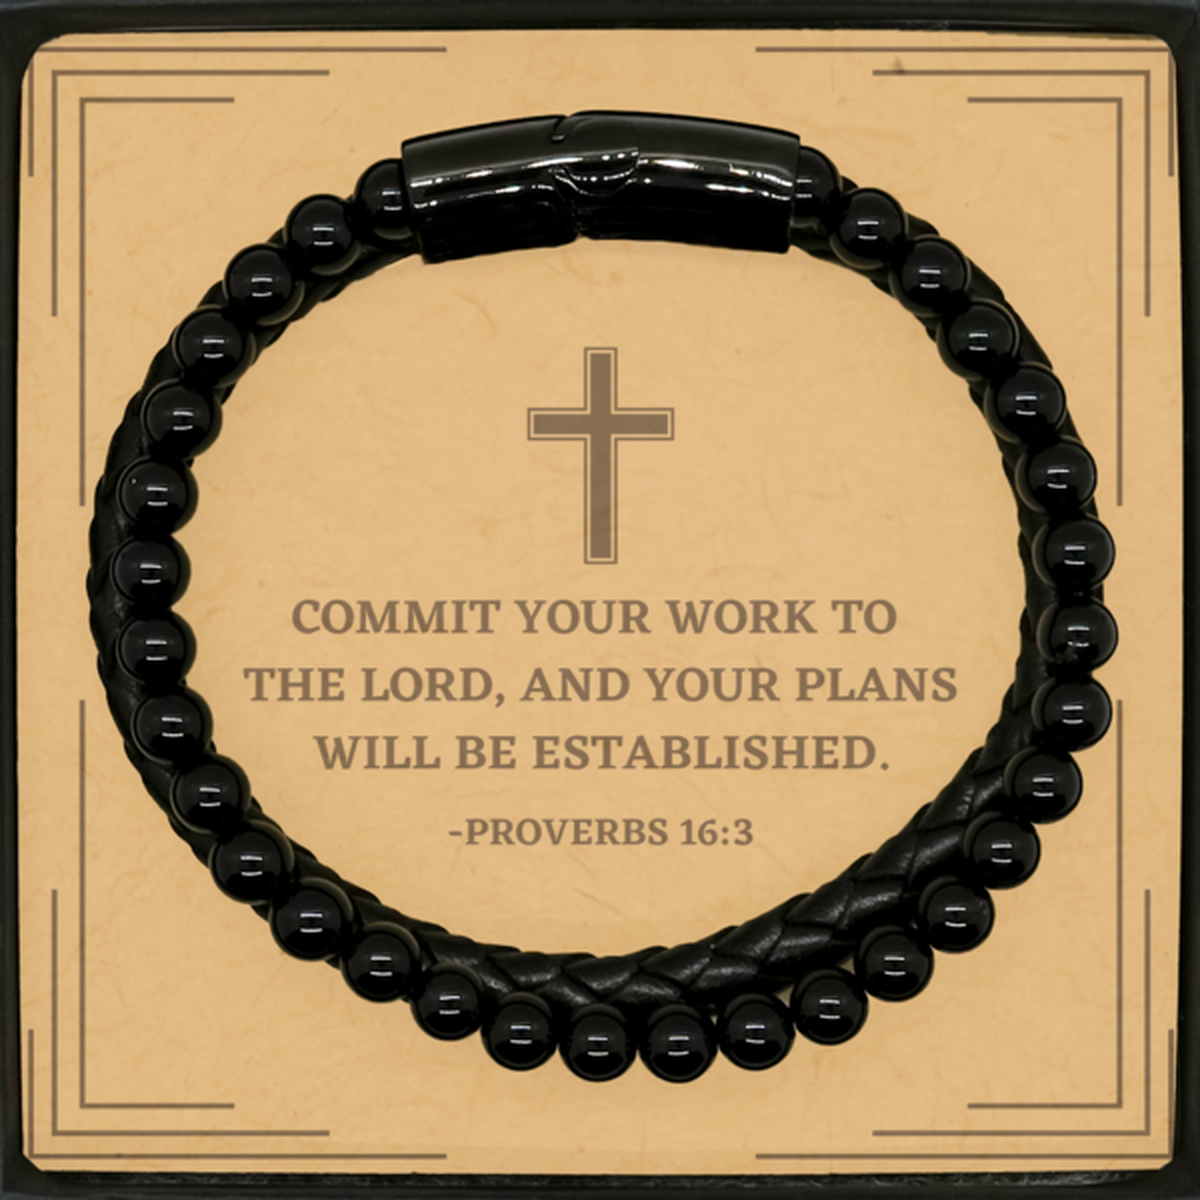 Baptism Gifts For Teenage Boys Girls, Christian Bible Verse Stone Leather Bracelet, Commit your work to the Lord, Confirmation Gifts, Bible Verse Card for Son, Godson, Grandson